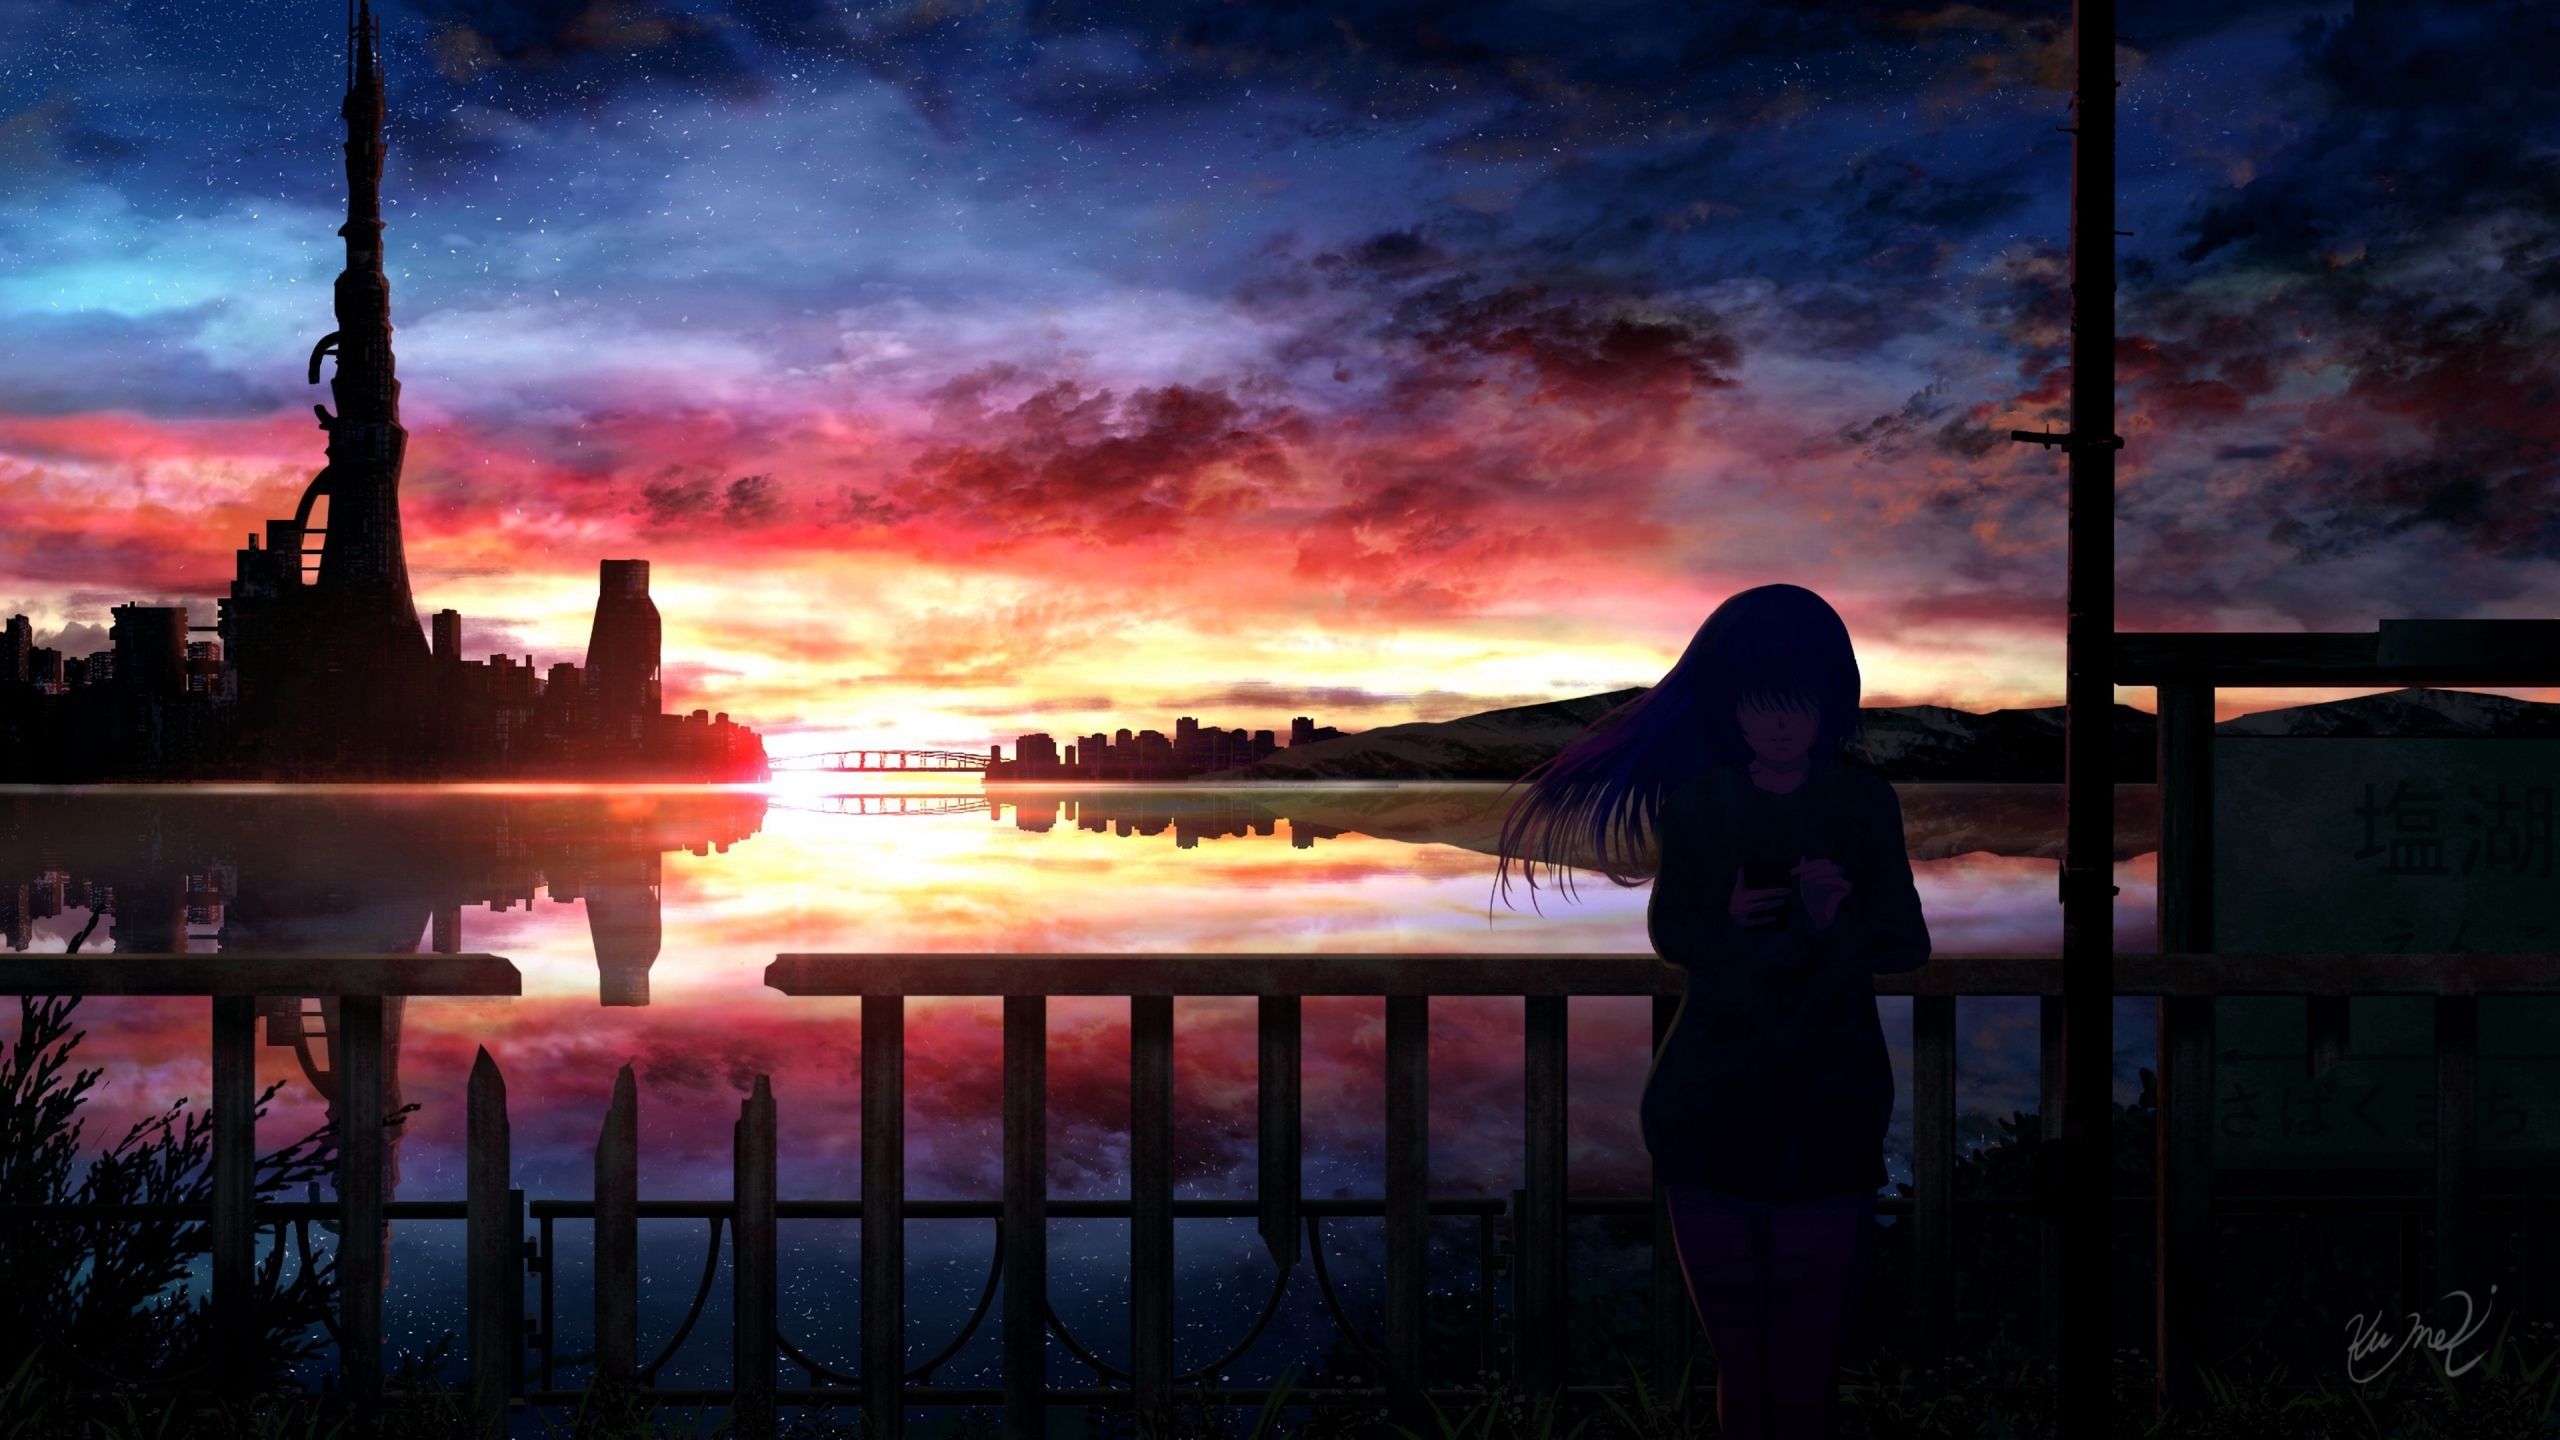 A beautiful sunset over a city, with a girl standing on a dock looking out at the water. - Anime sunset